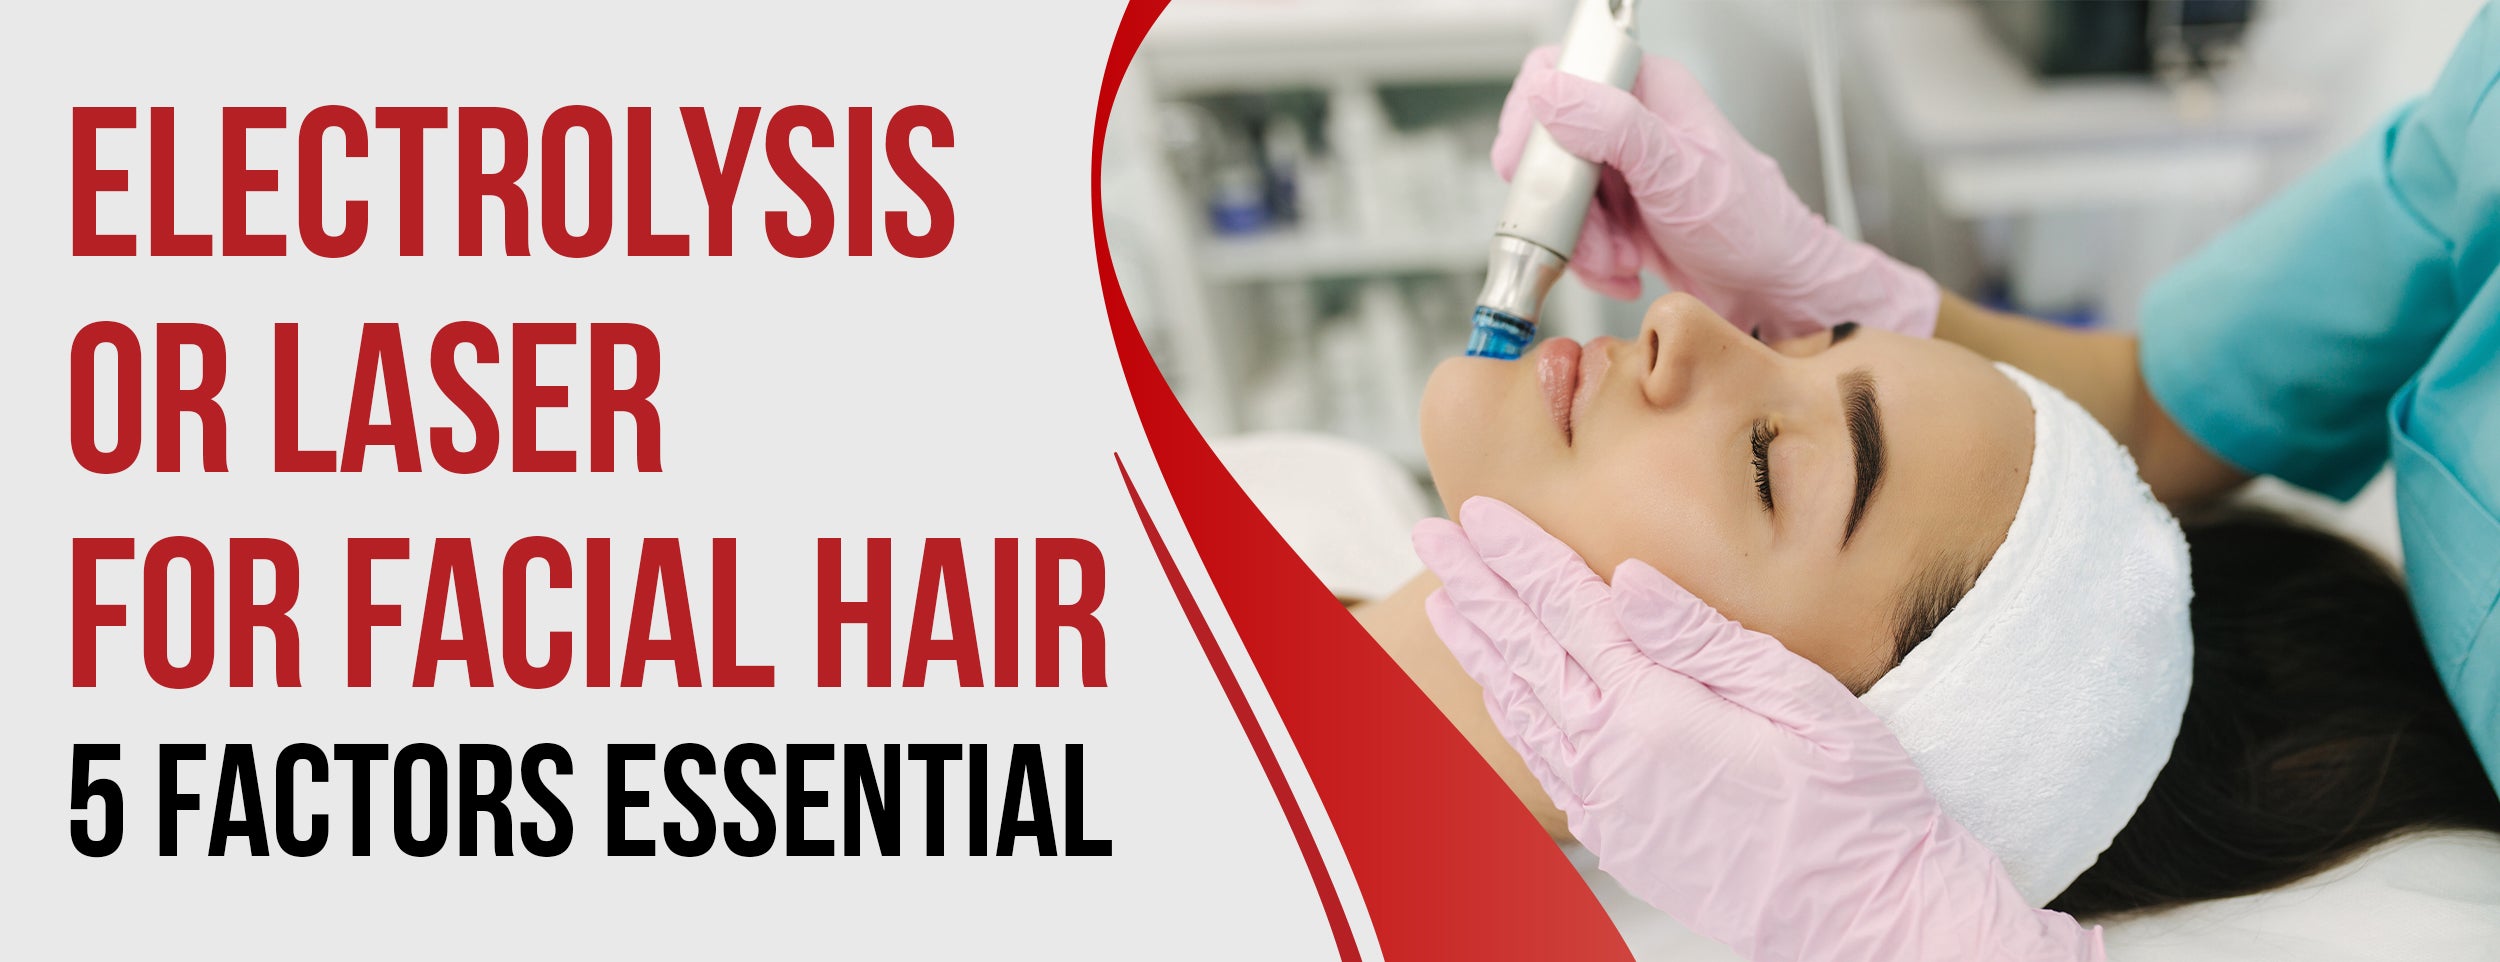 Hair removal by electrolysis or laser